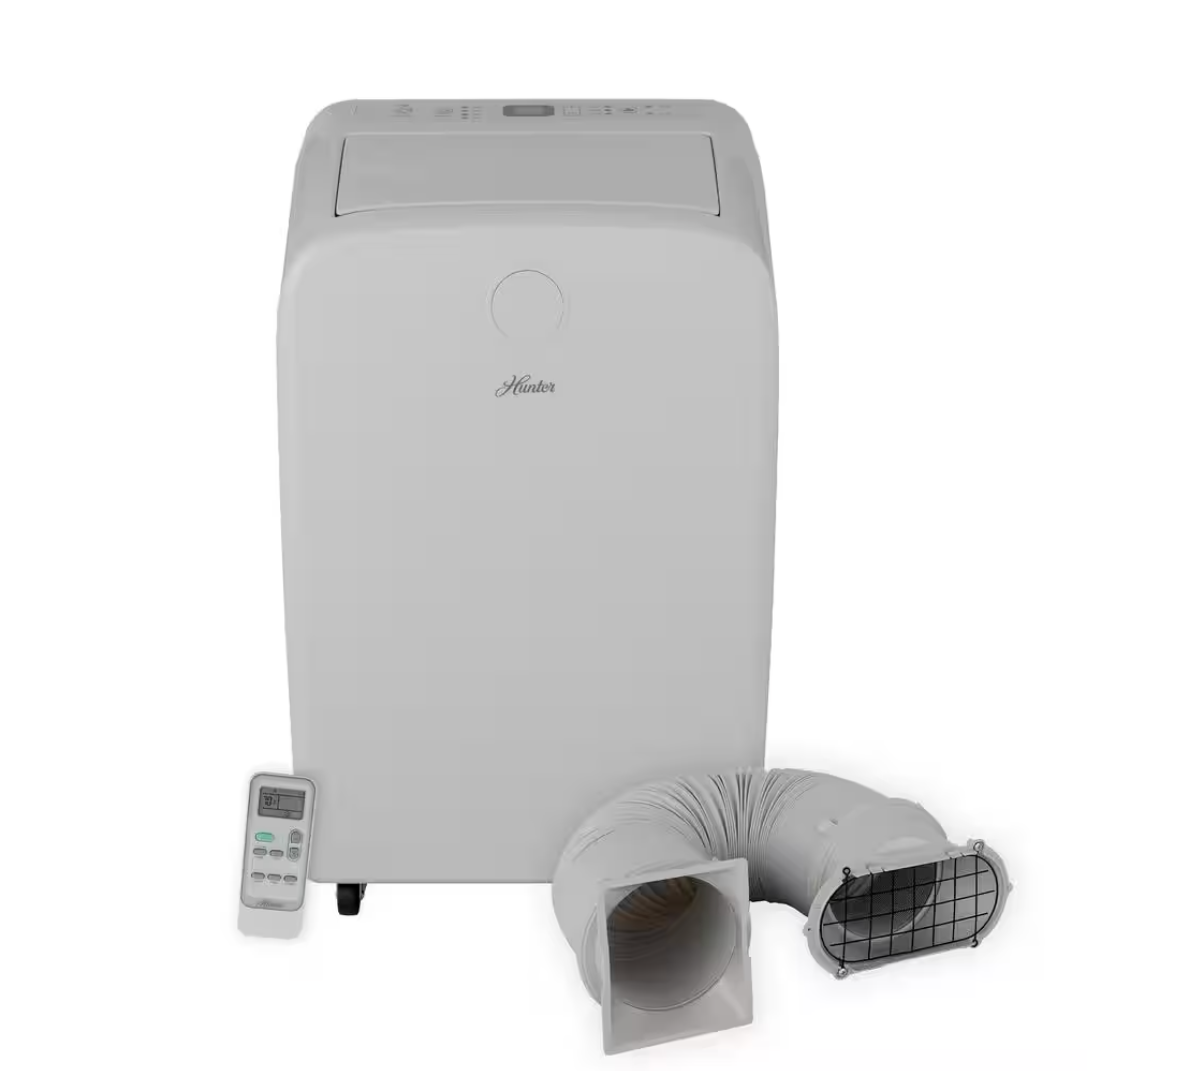 Hunter 10,000 BTU (8,000 SACC) Portable Air Conditioner with Heat for Rooms Upto 450 Sq. Ft.